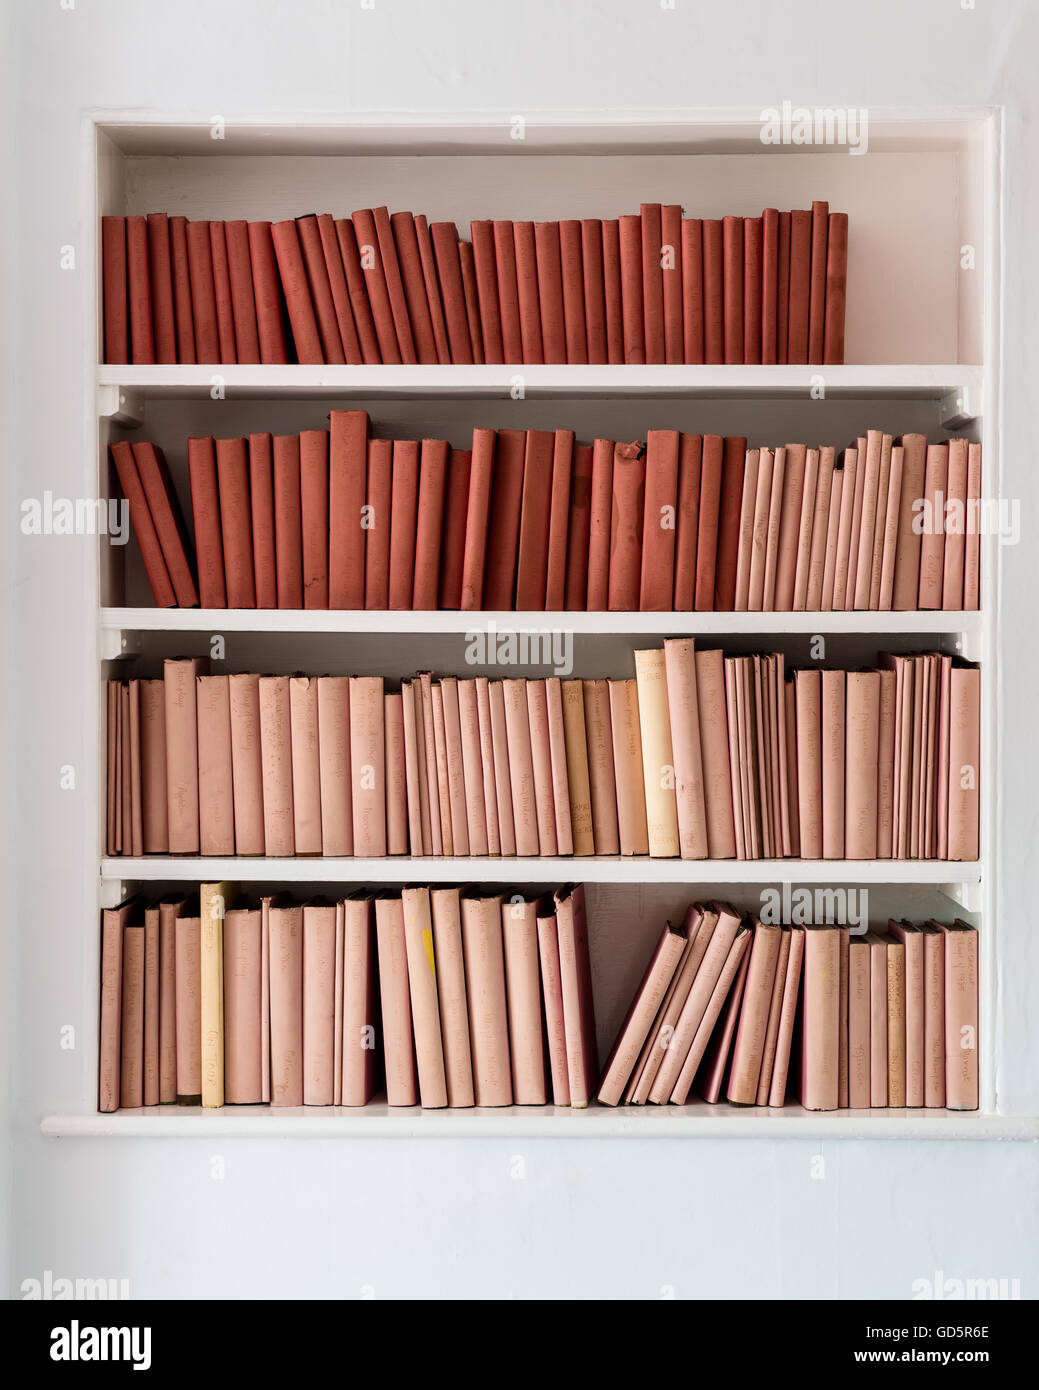 First edition French books covered in pink and red dust wrappers Stock Photo